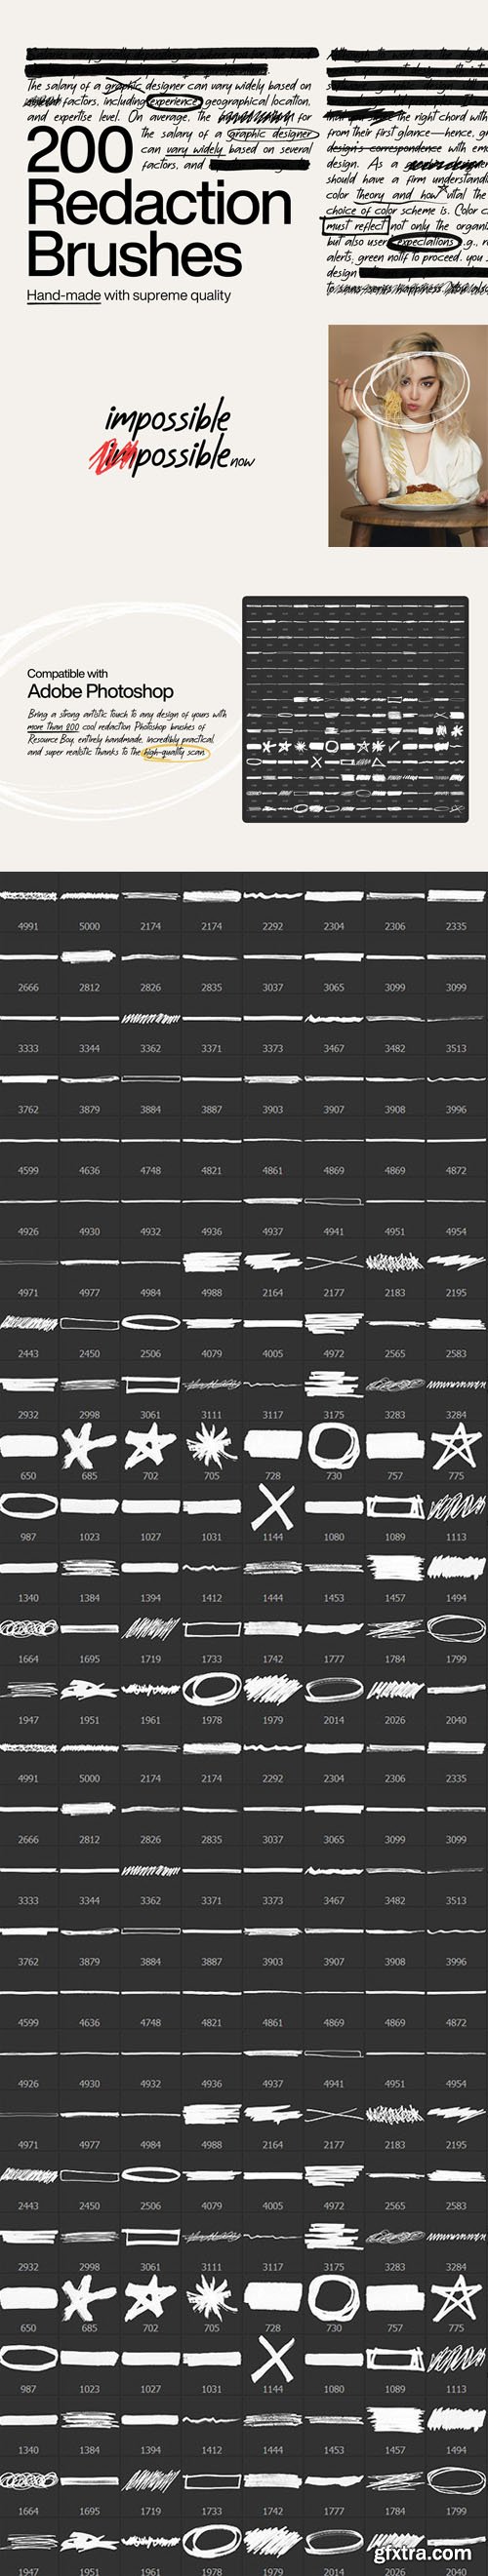 Redaction Brushes Pack for Photoshop